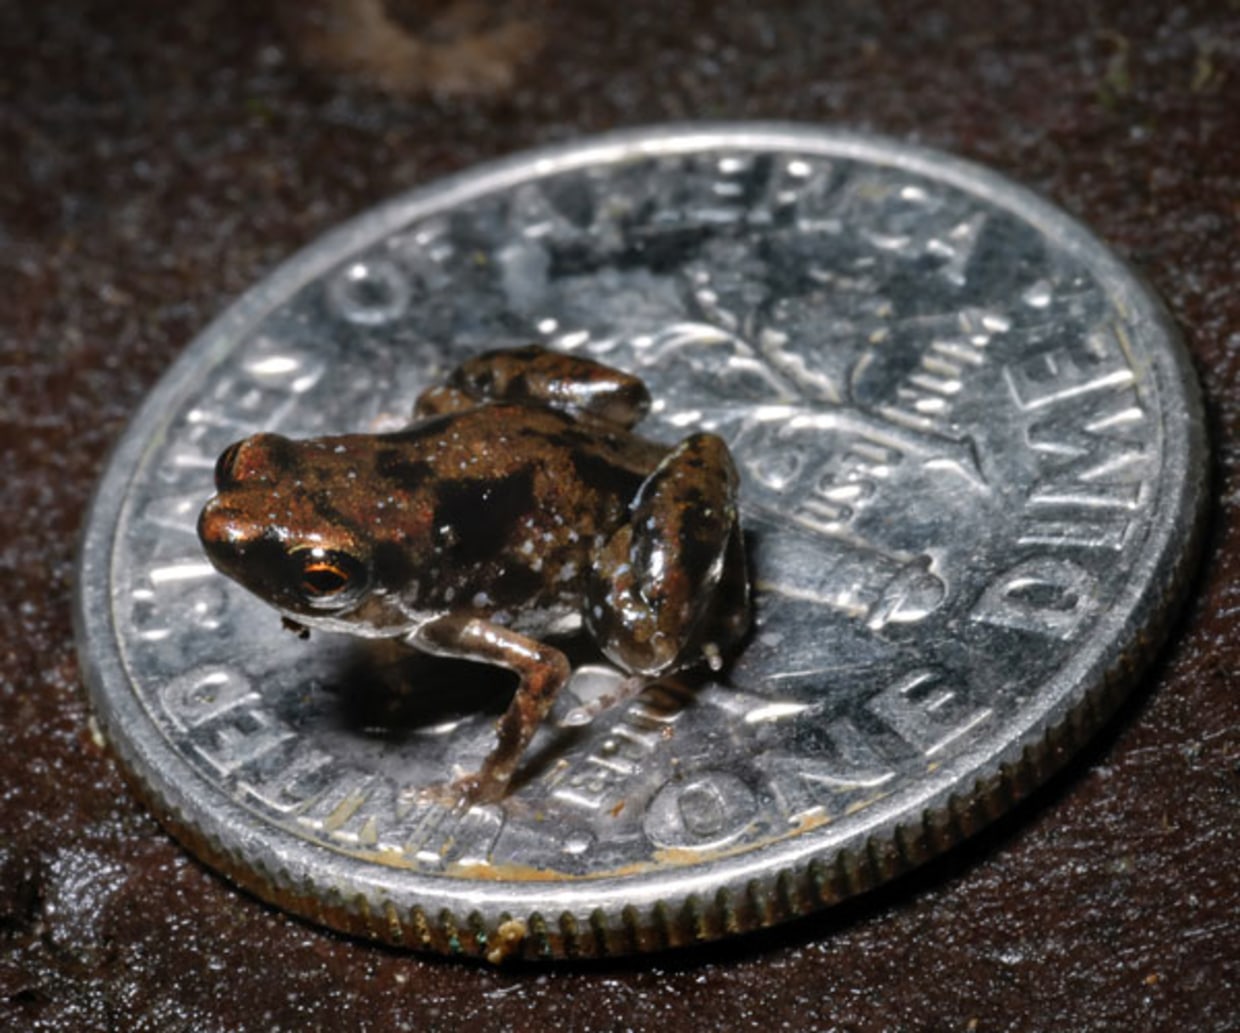 Seven New Mini-Frogs Found—Among Smallest Known